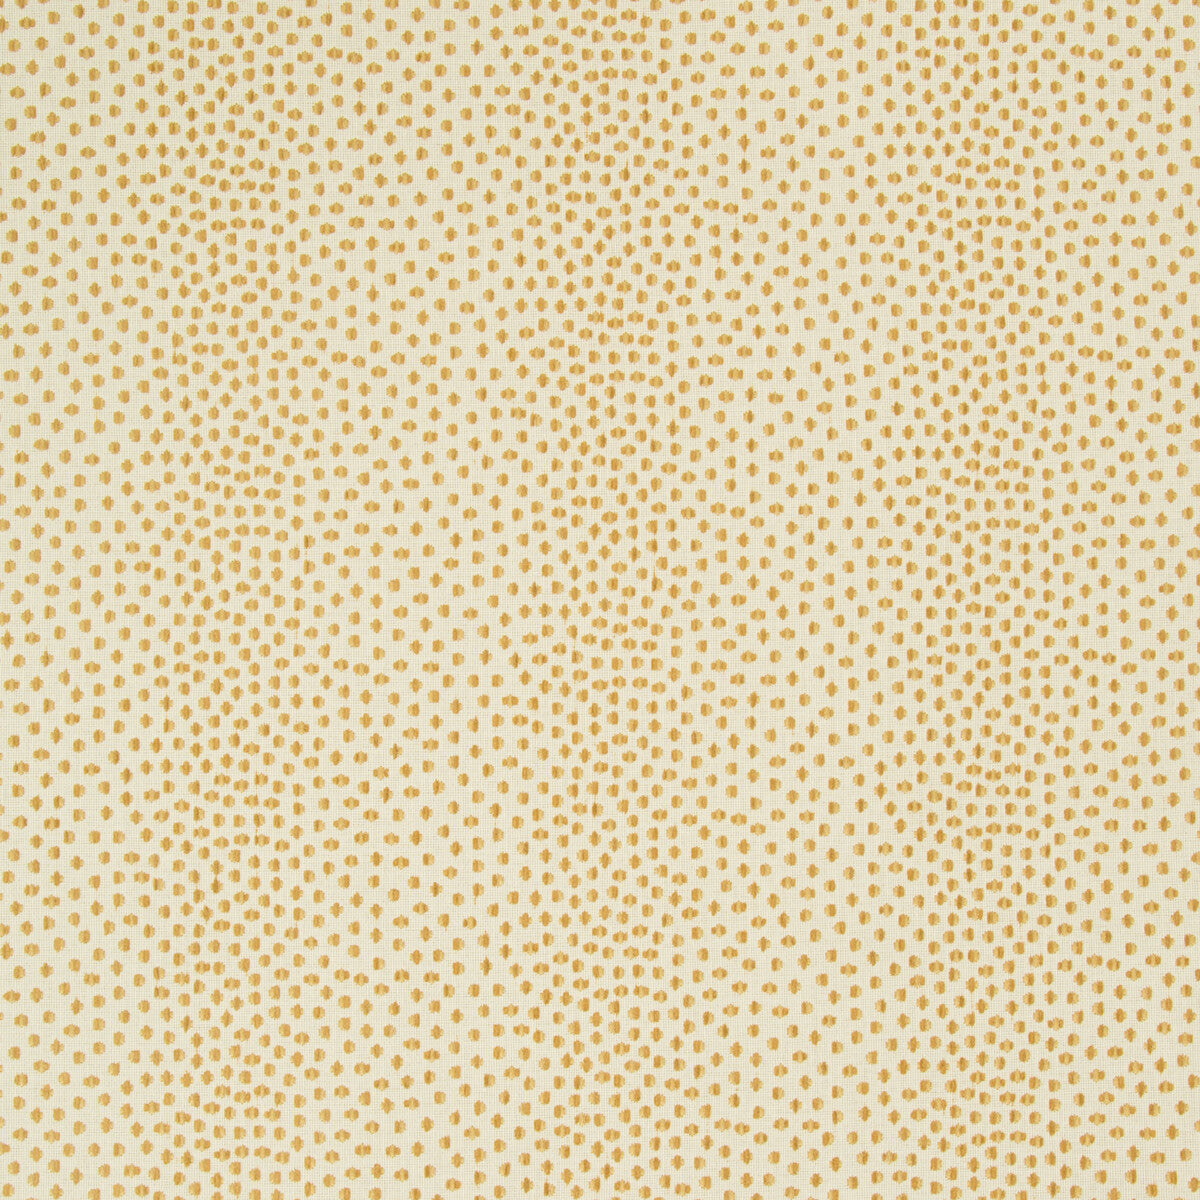 Kravet Design fabric in 34710-16 color - pattern 34710.16.0 - by Kravet Design in the Crypton Home collection